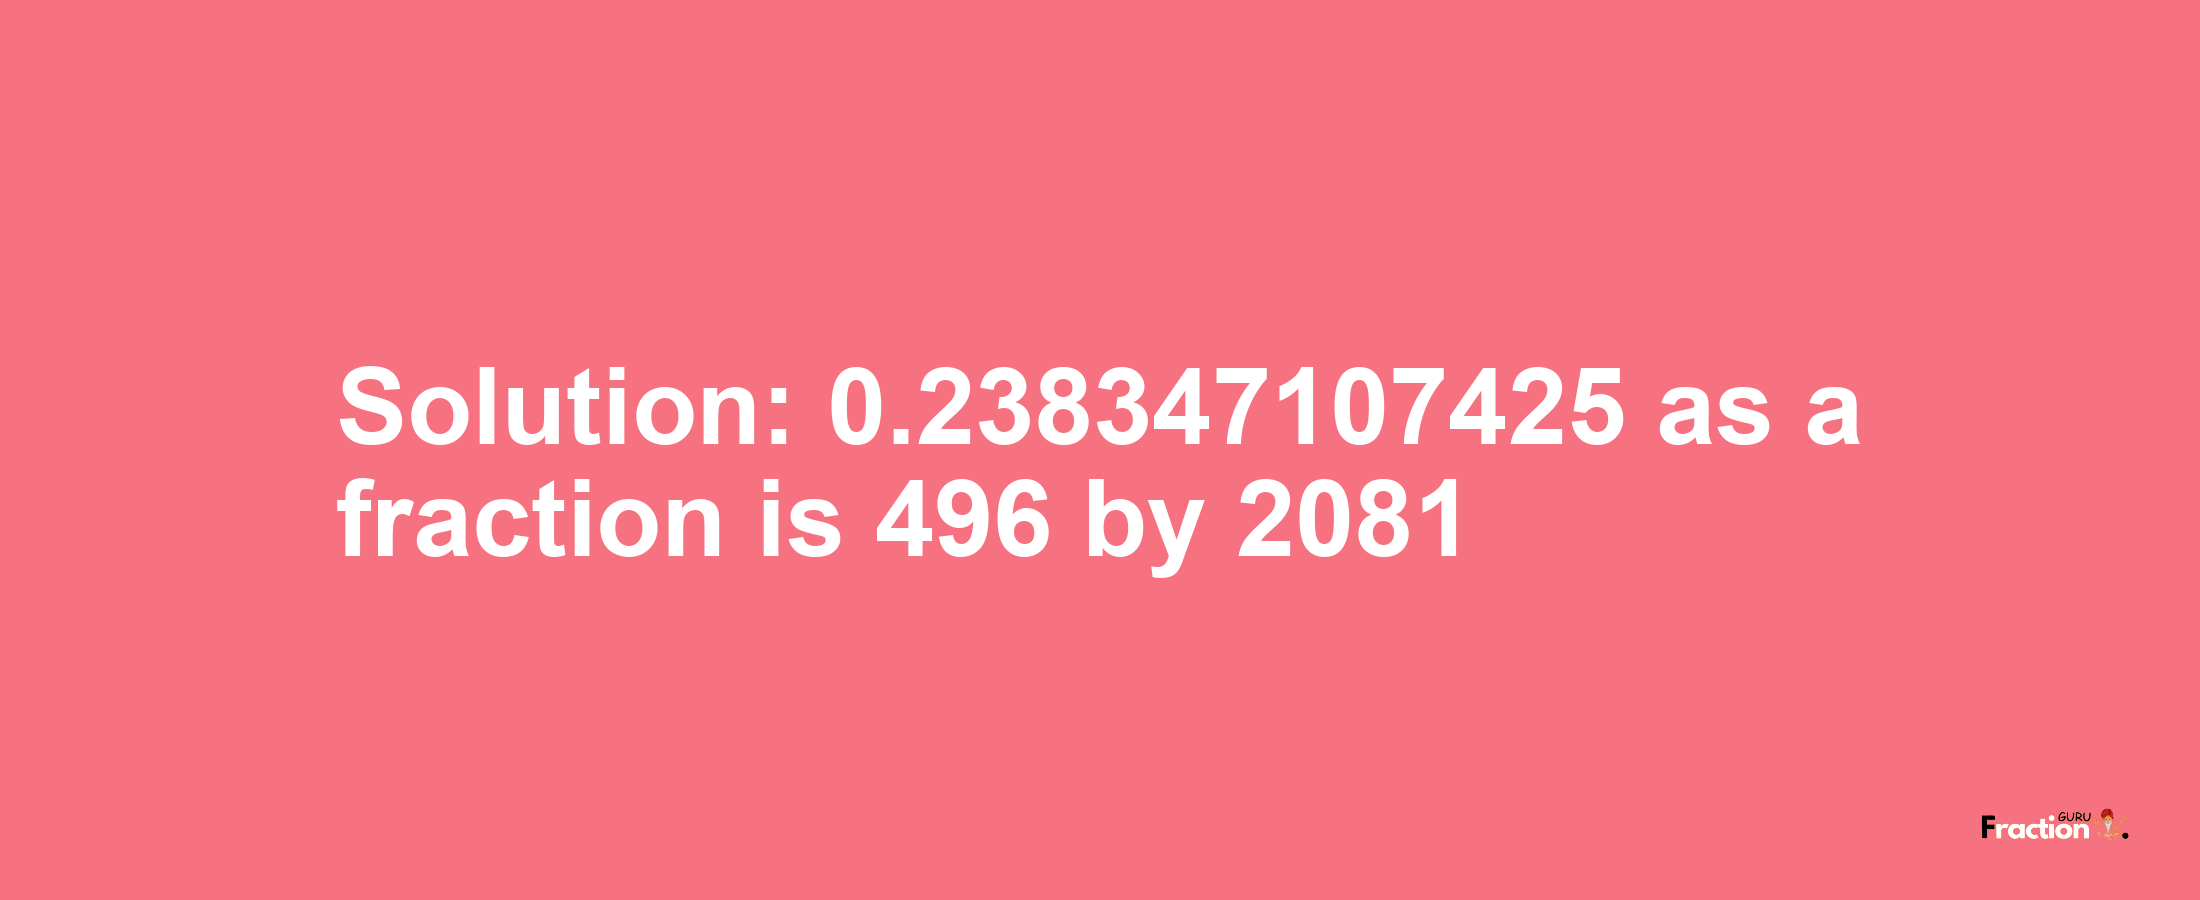 Solution:0.238347107425 as a fraction is 496/2081